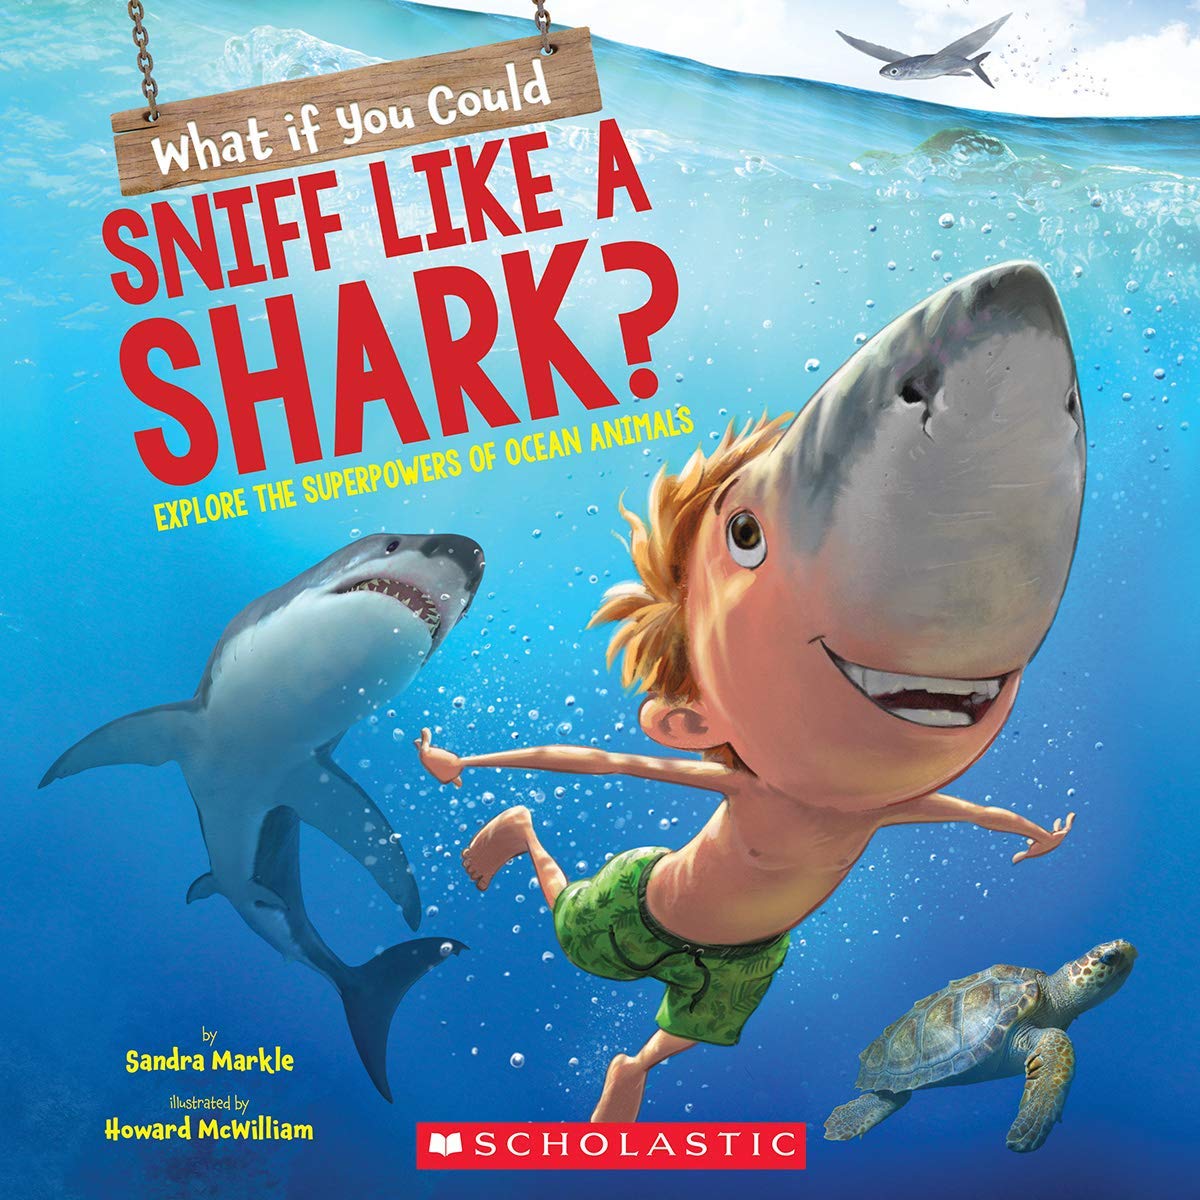 What if you could sniff like a shark? : explore the superpowers of ocean animals 책표지